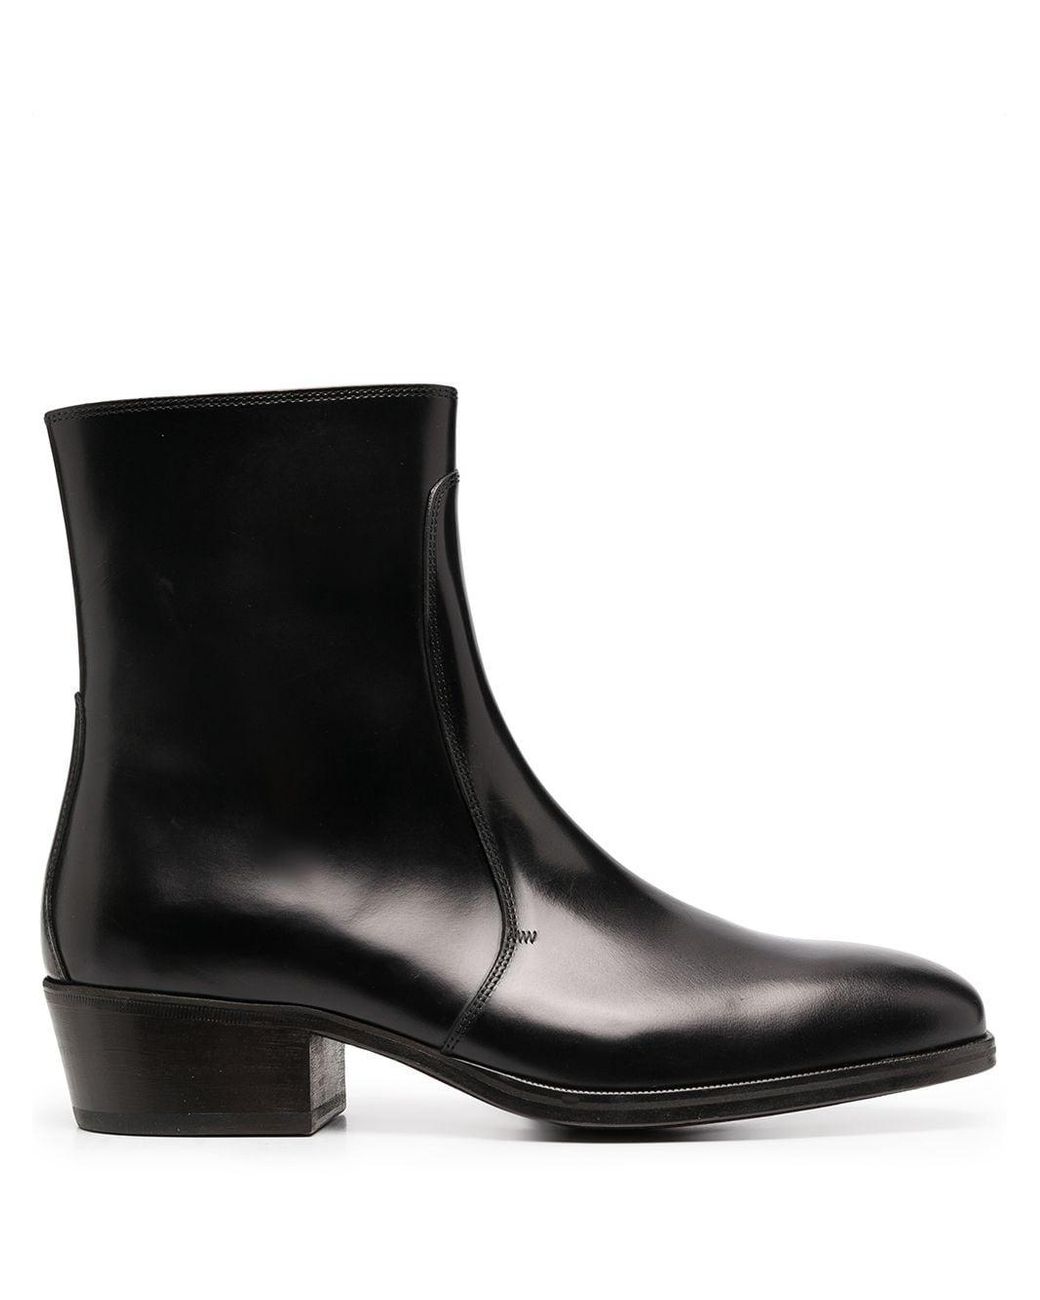 Lemaire Leather Zipped Ankle Boots in Black for Men - Lyst